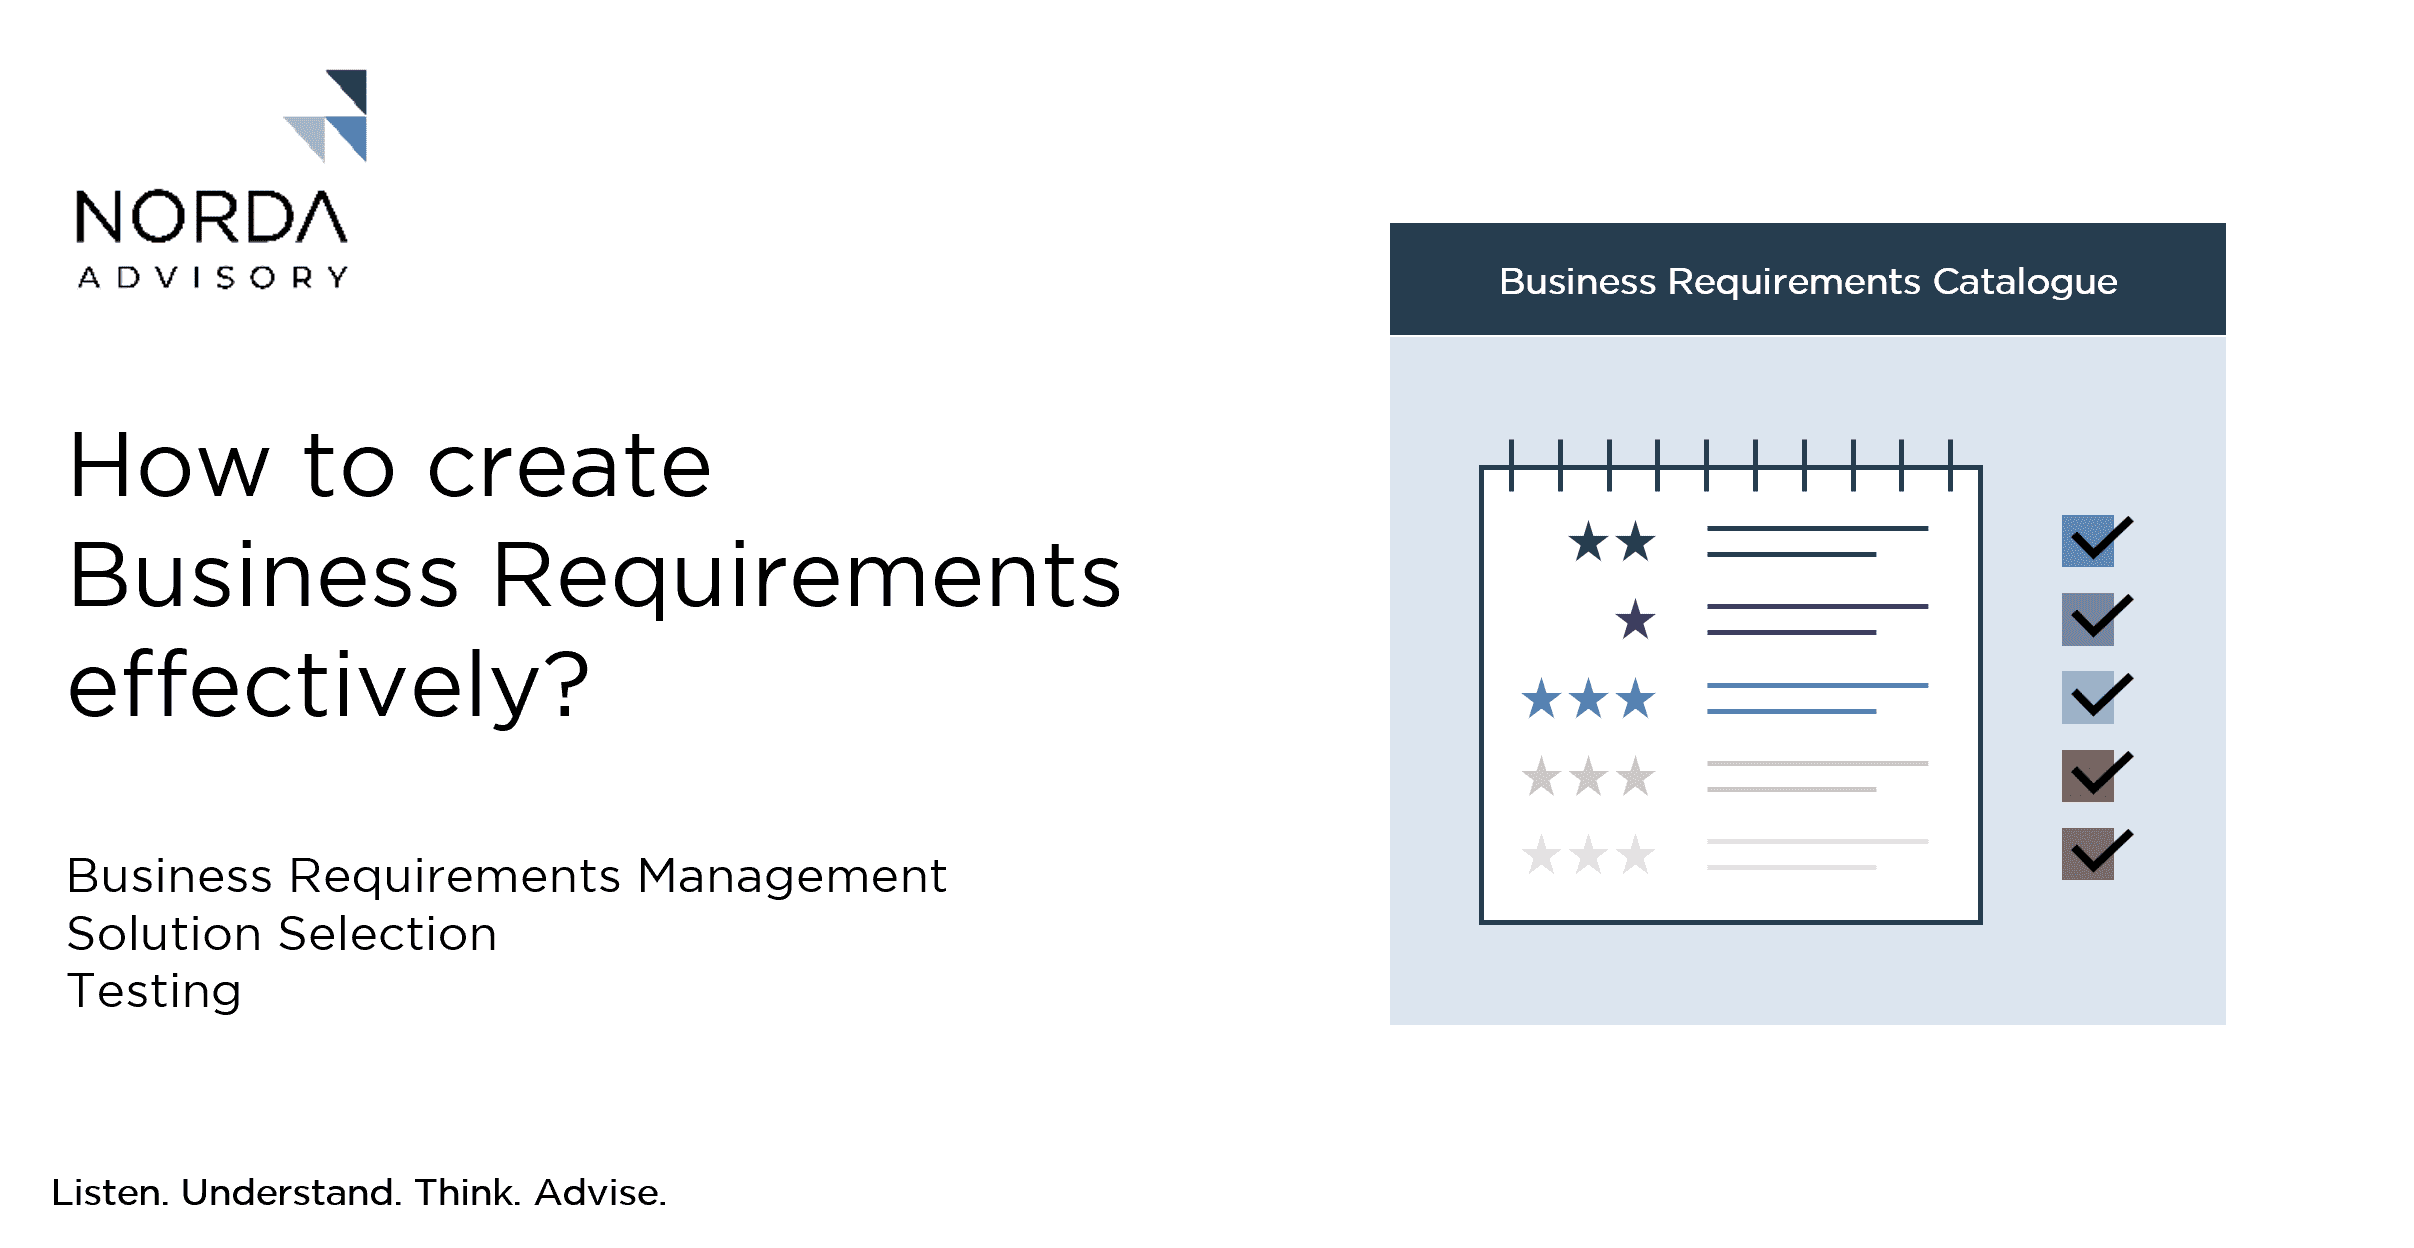 How to create Business Requirements effectively